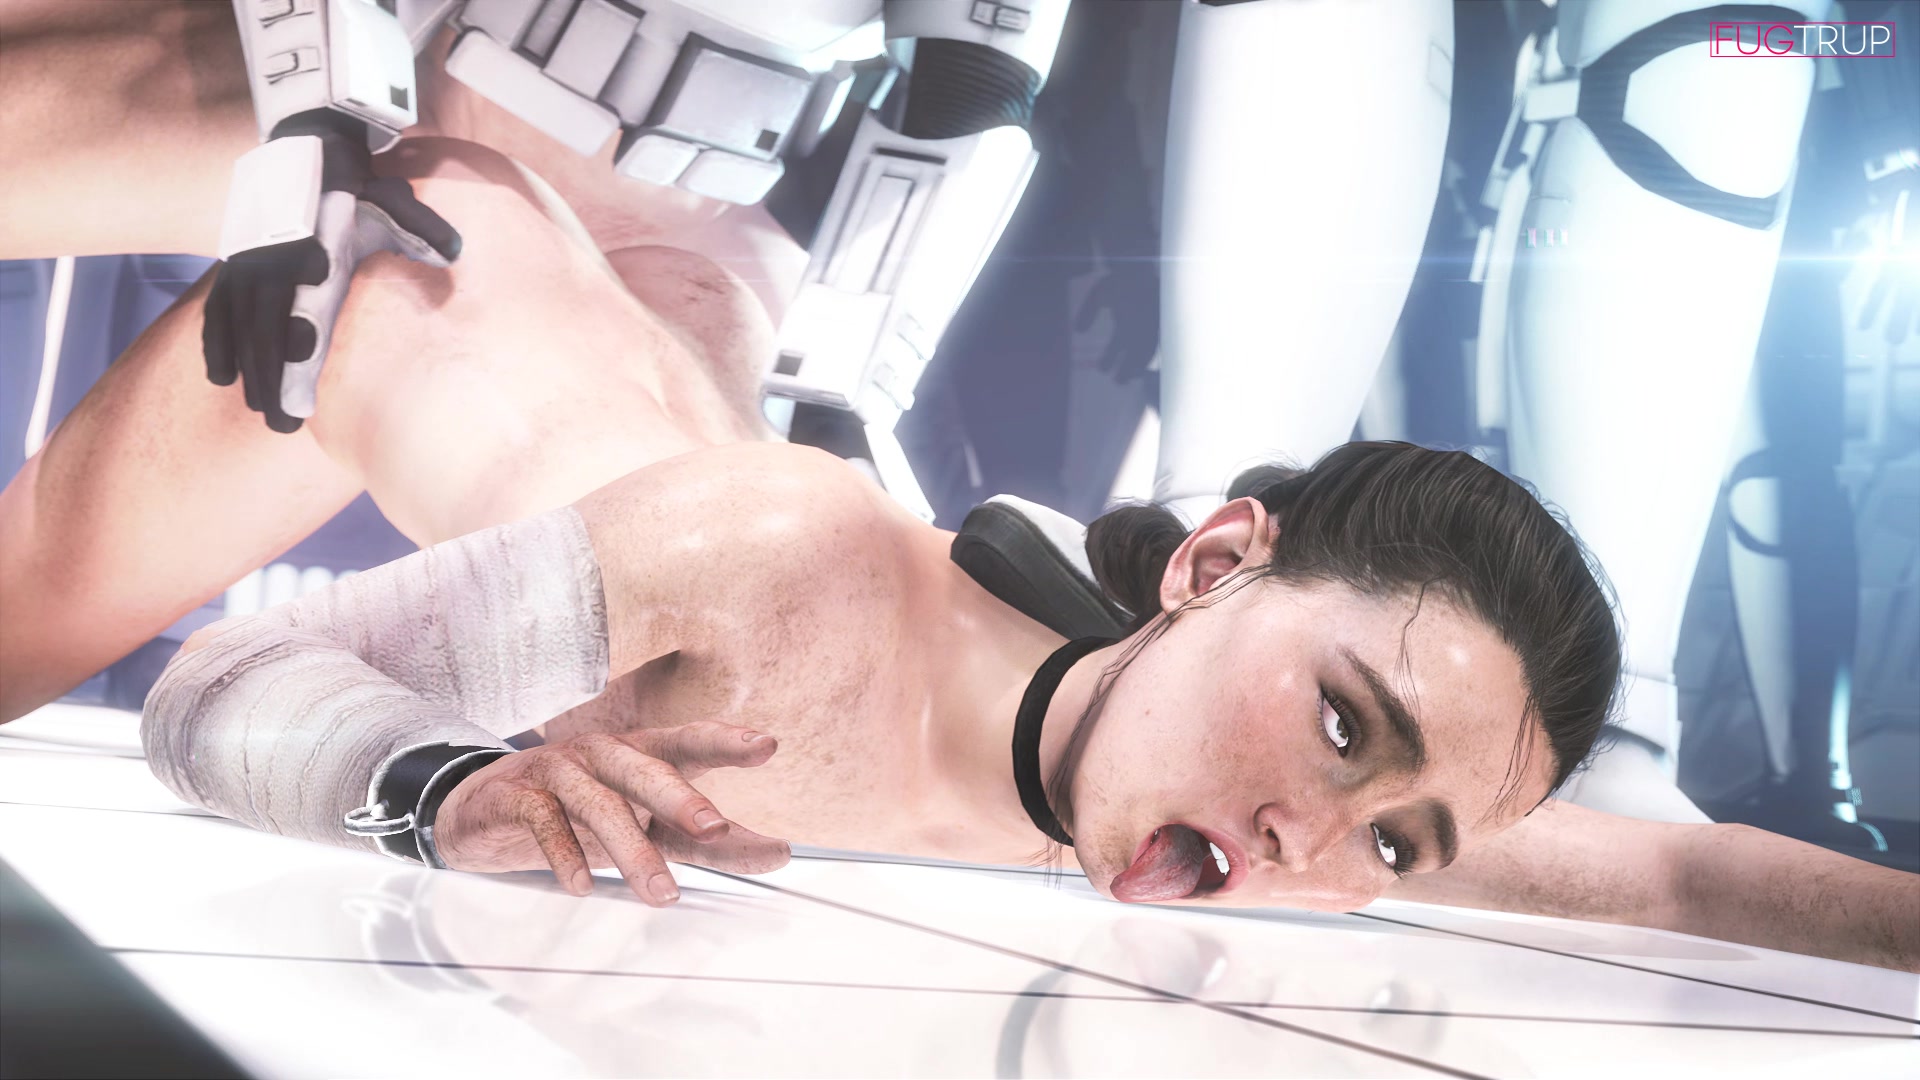 Star Wars Ray Hentai Porn - Sexual punishment - Rey from Star Wars